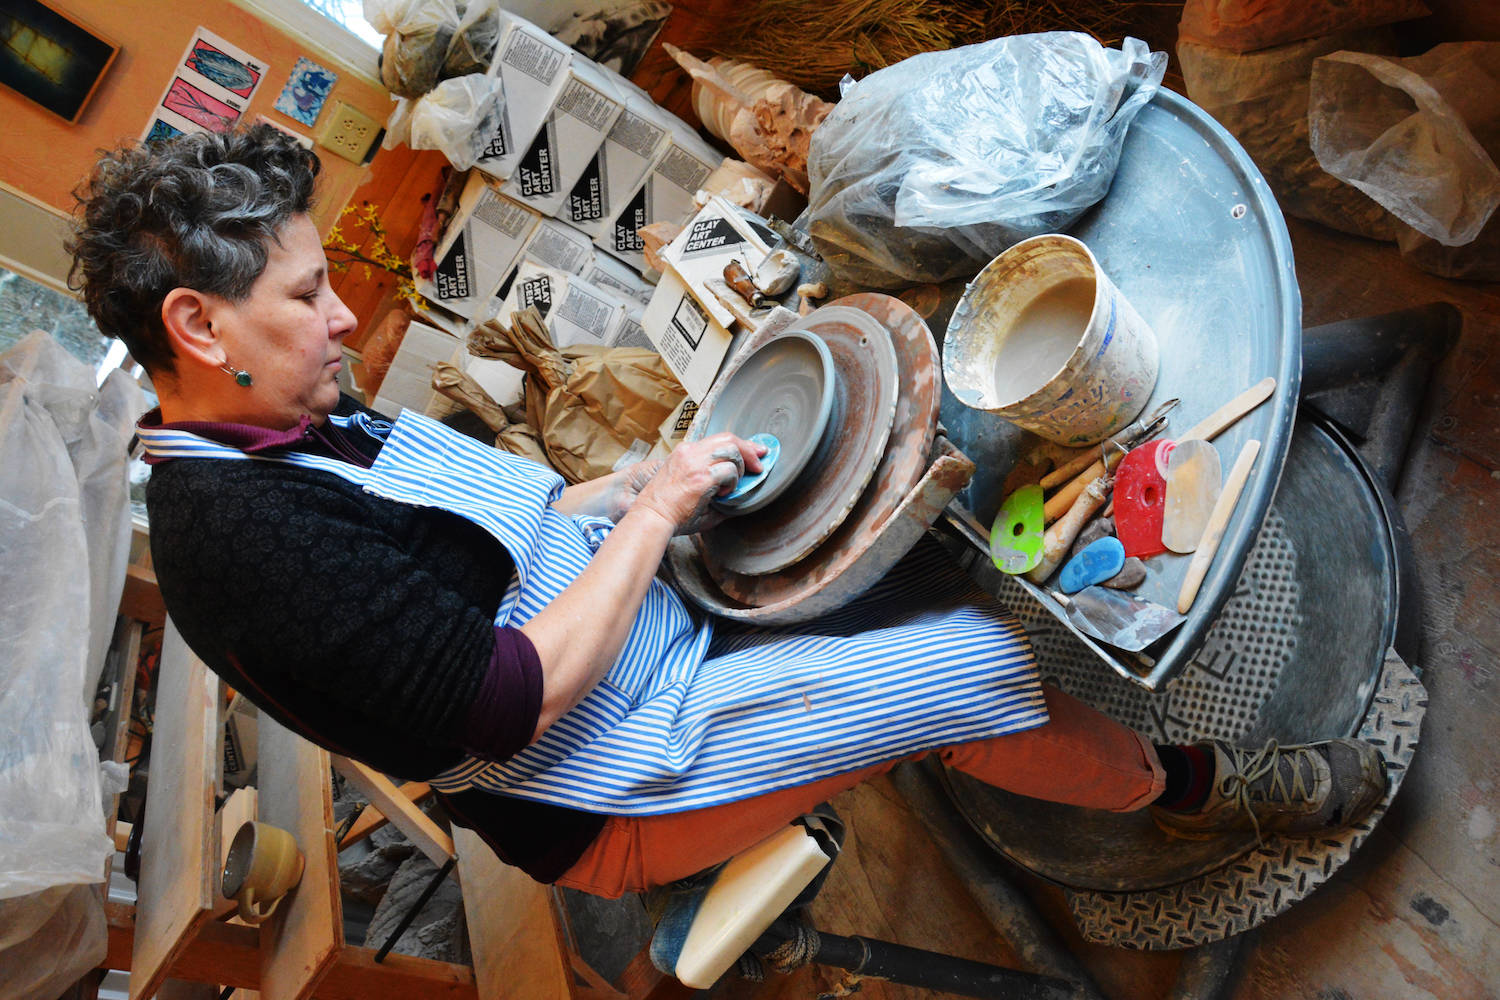 Ceramic artist Cynthia Morelli makes plates for Bunnell Street Arts Center’s annual Plate Project. (Photo provided)